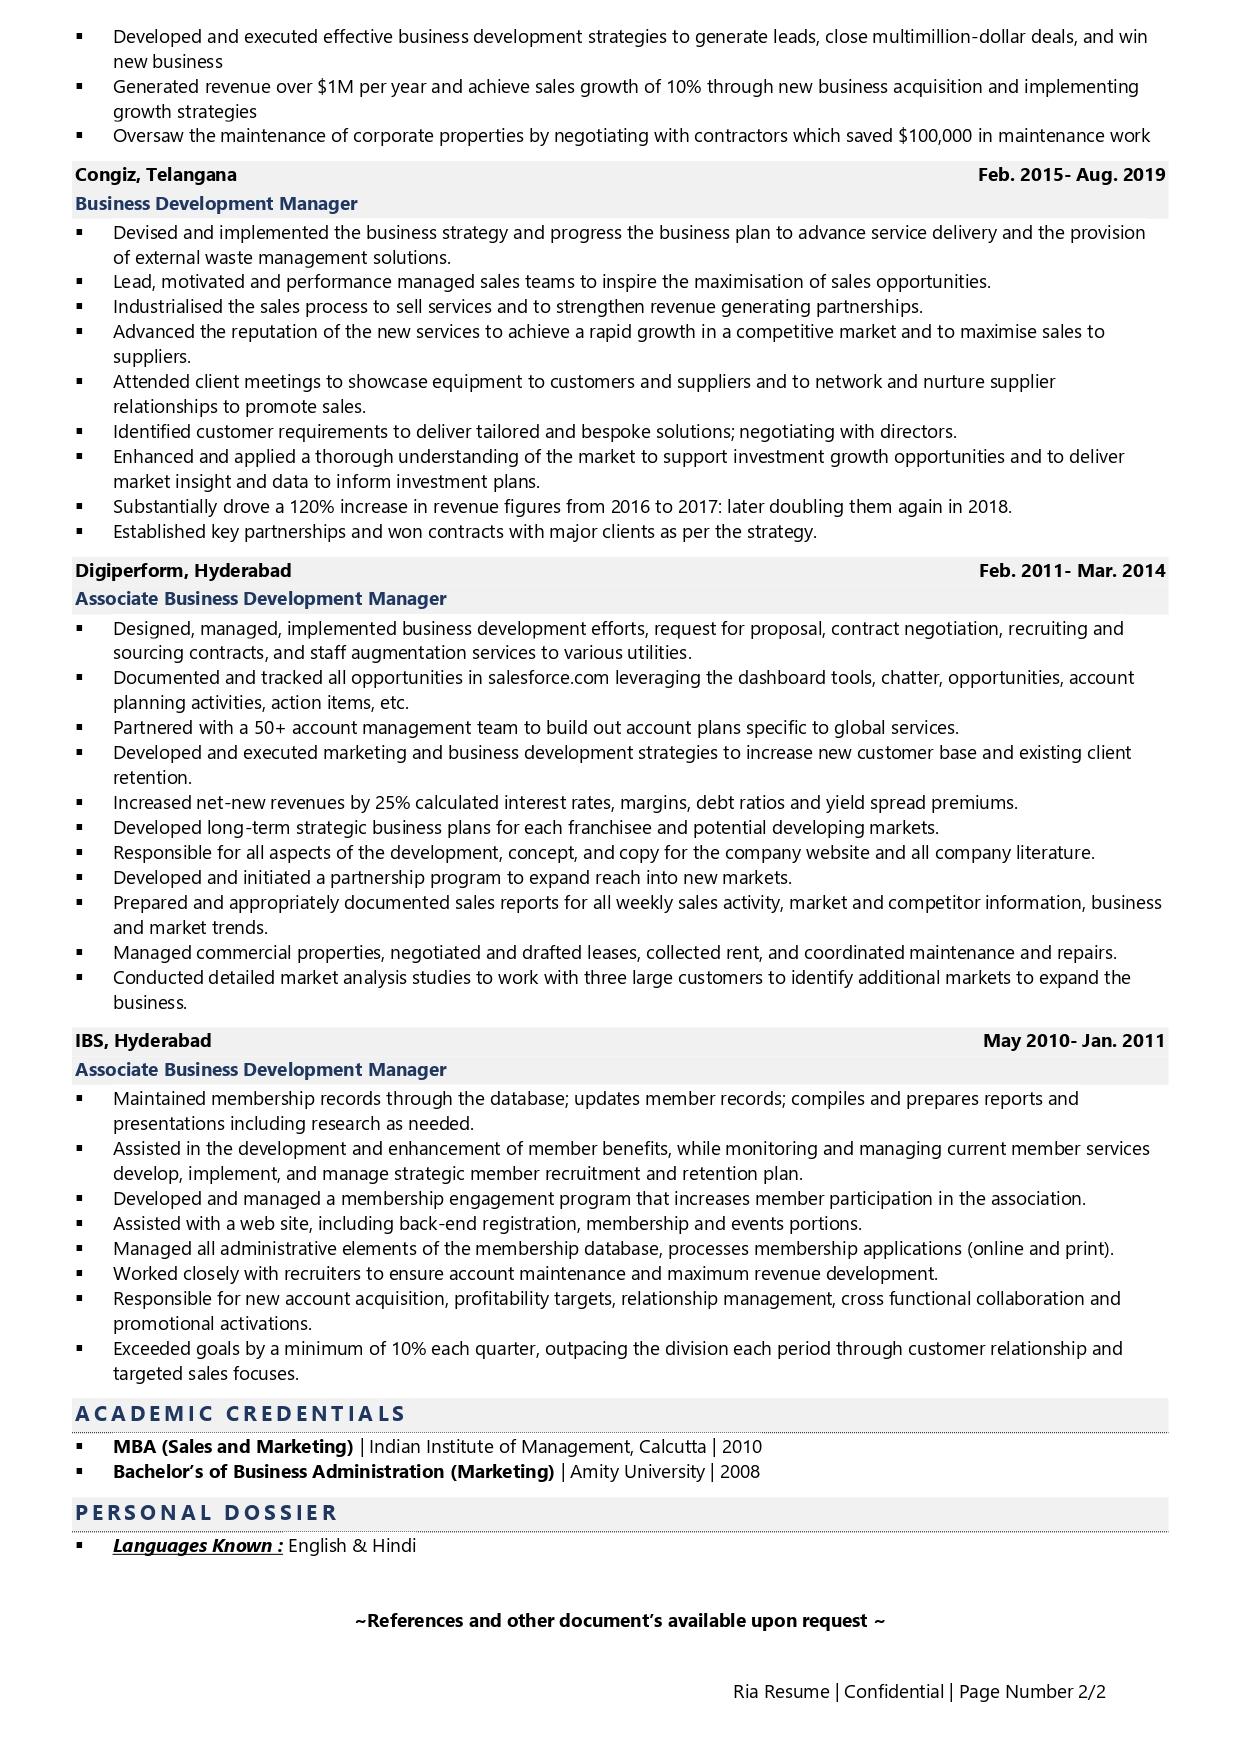 Business Development Manager - Resume Example & Template